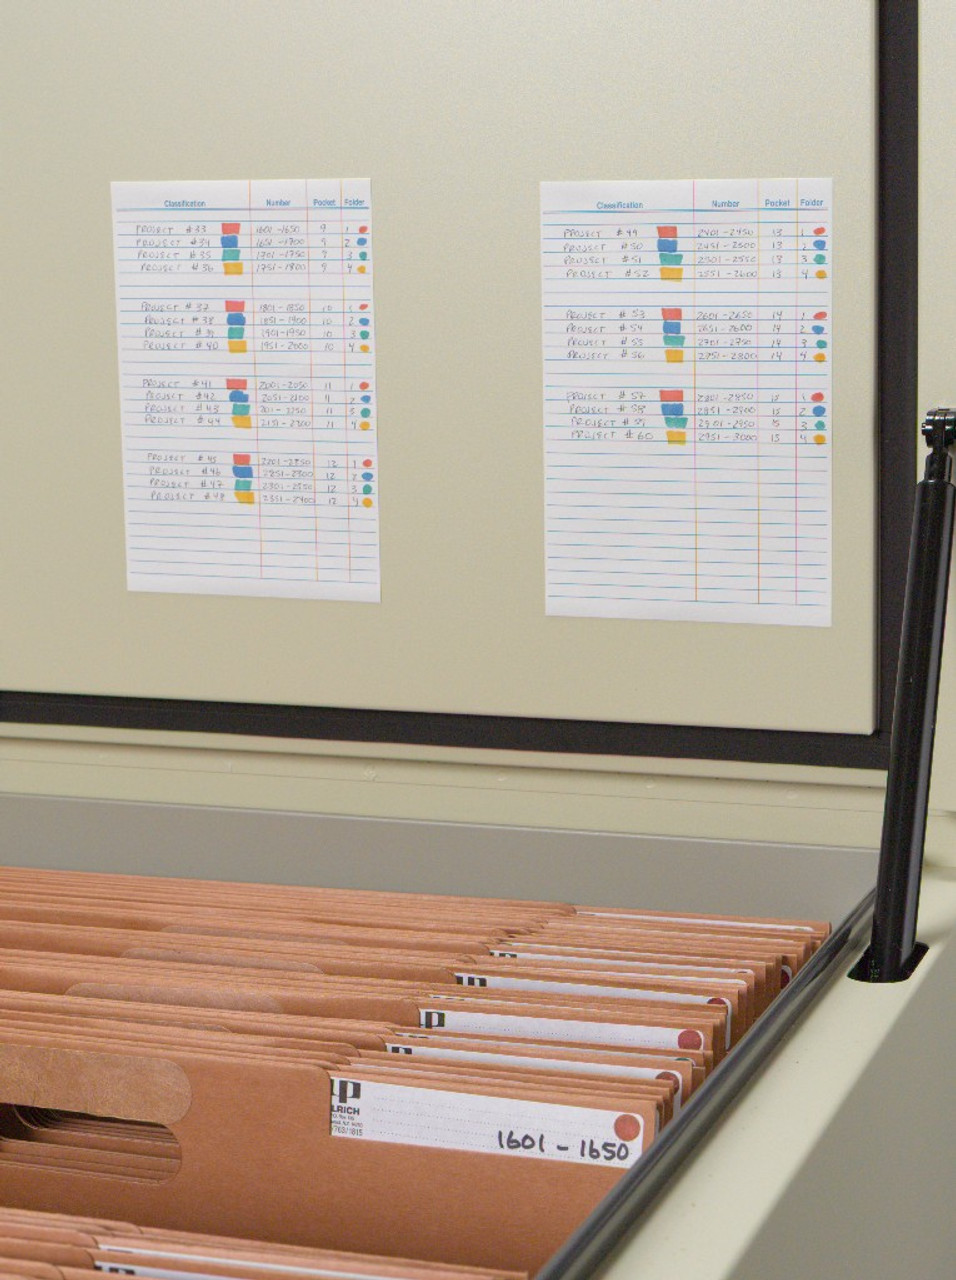 How to store large documents like maps and plans. The Planfile cabinet provides maximum protection. In addition, the index cards and large folder labels provide the perfect organization of your blueprint files.